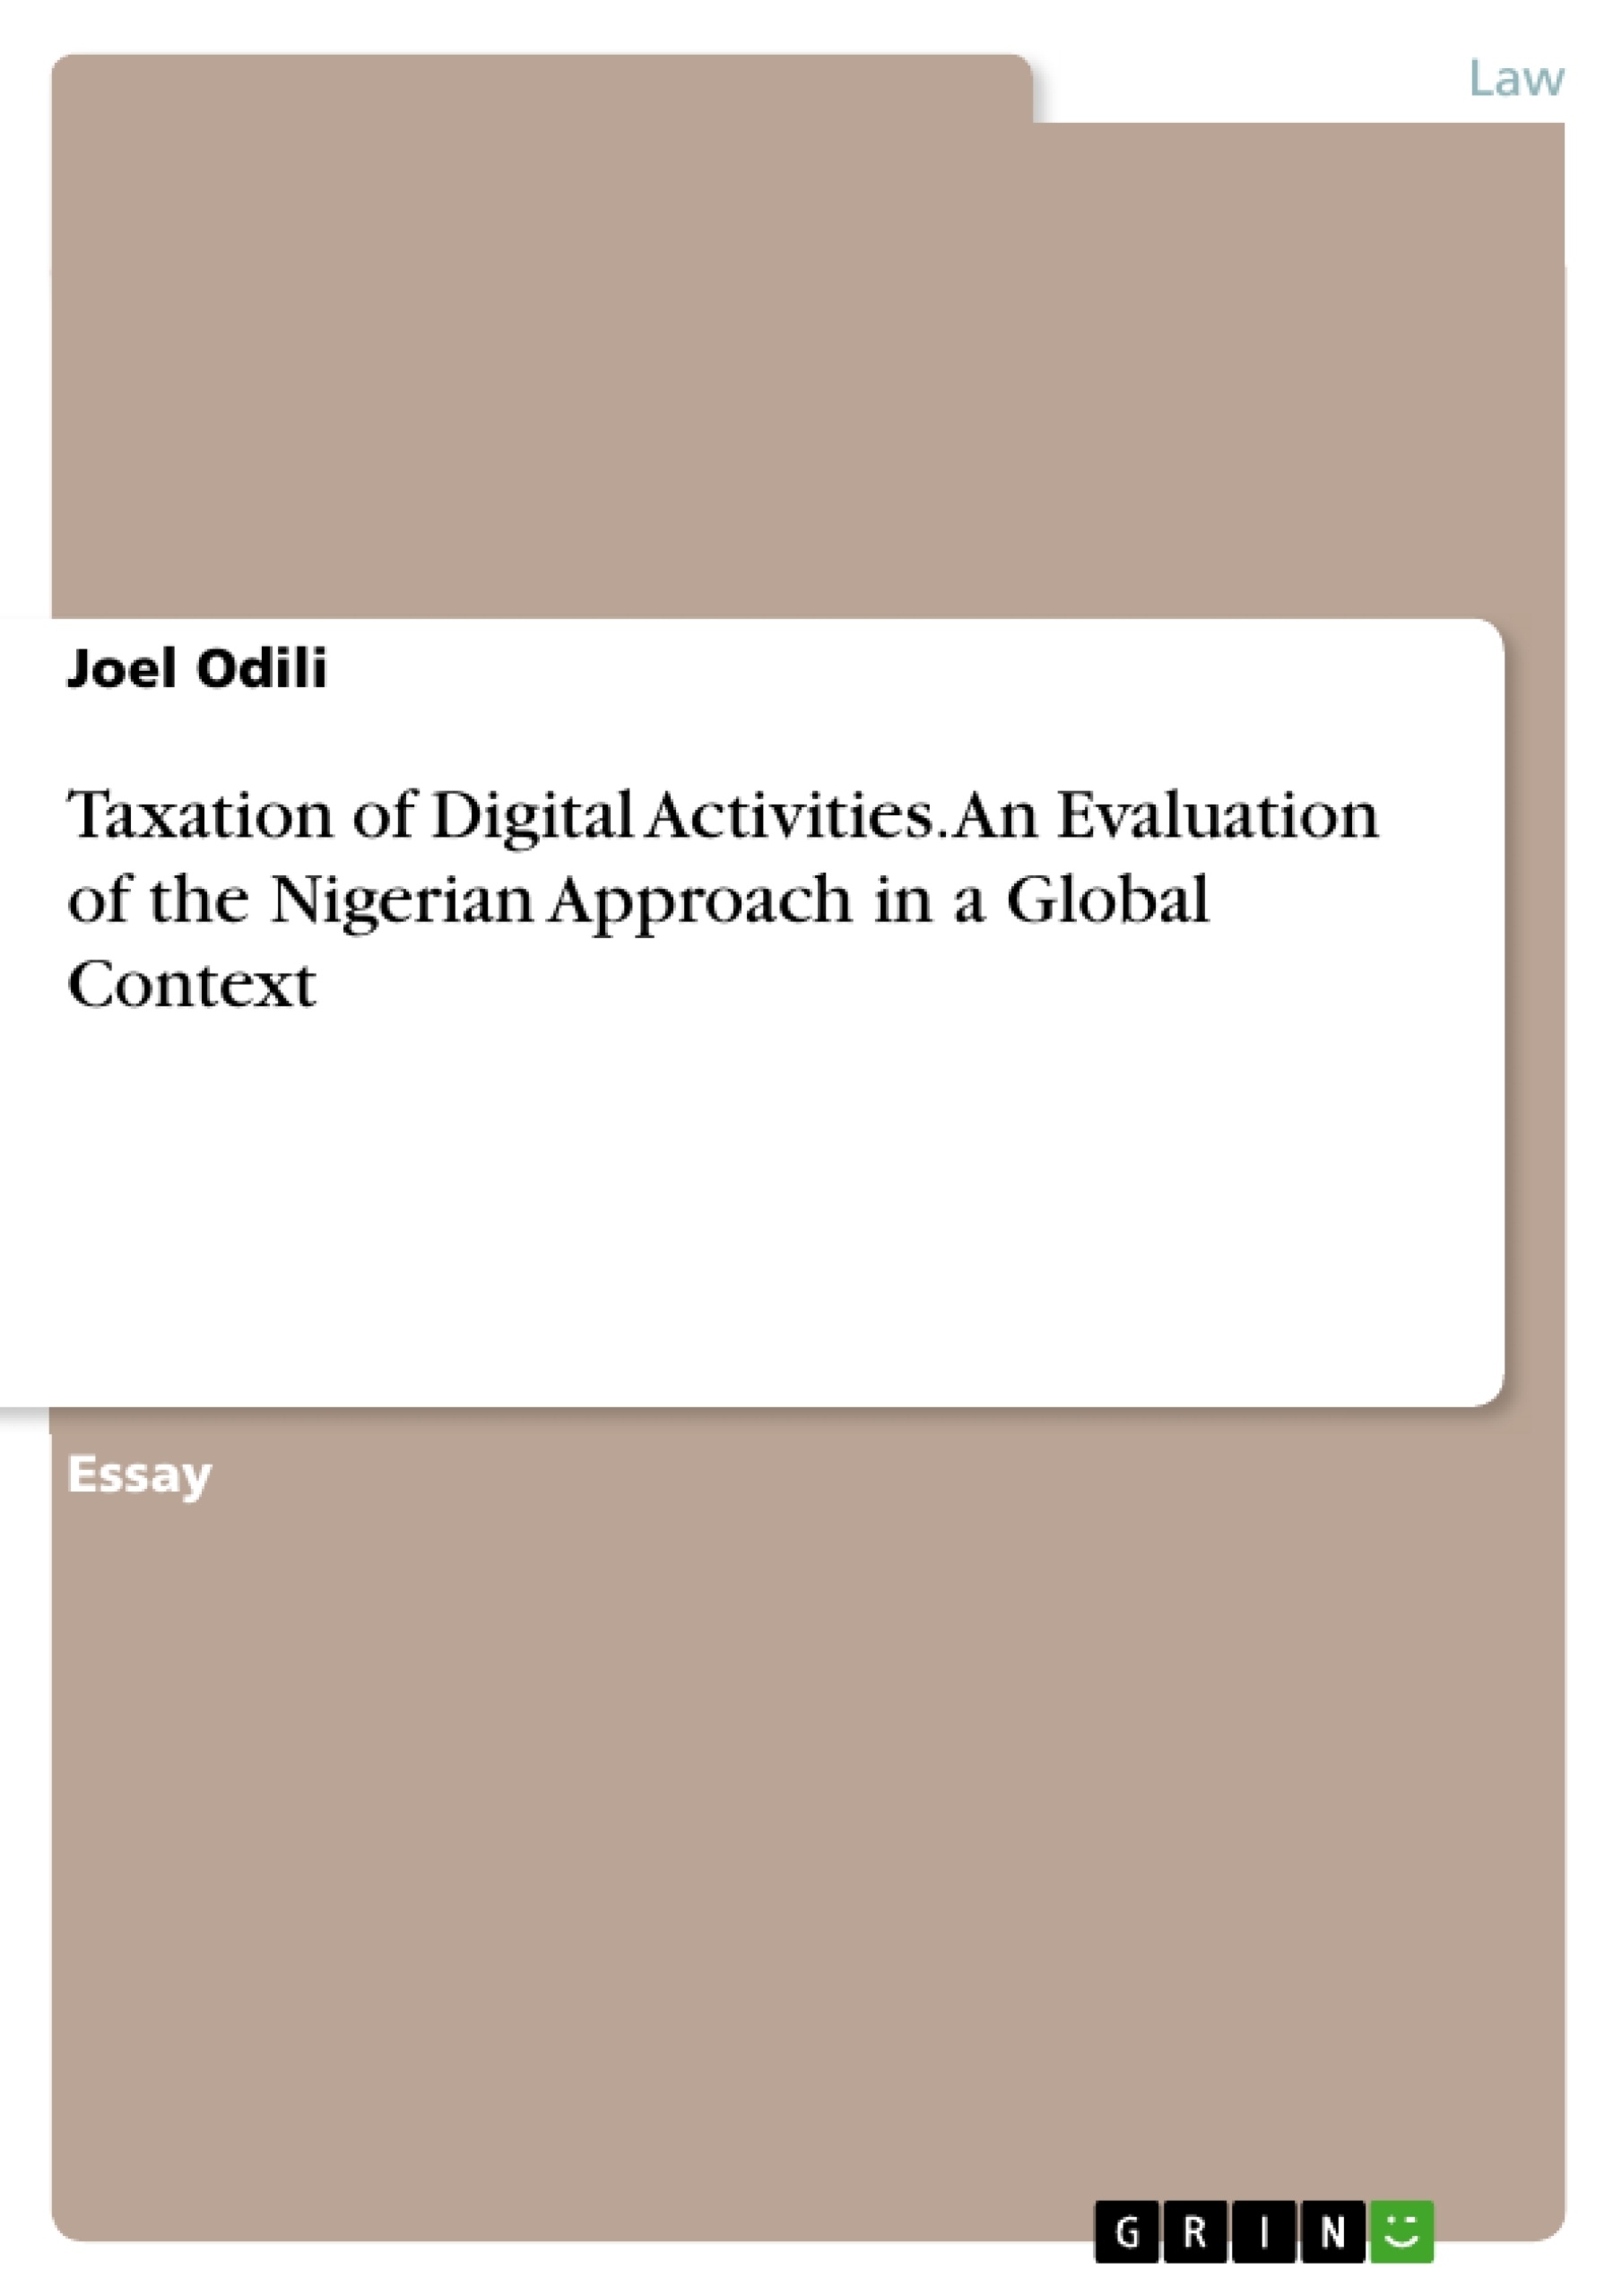 Title: Taxation of Digital Activities. An Evaluation of the Nigerian Approach in a Global Context